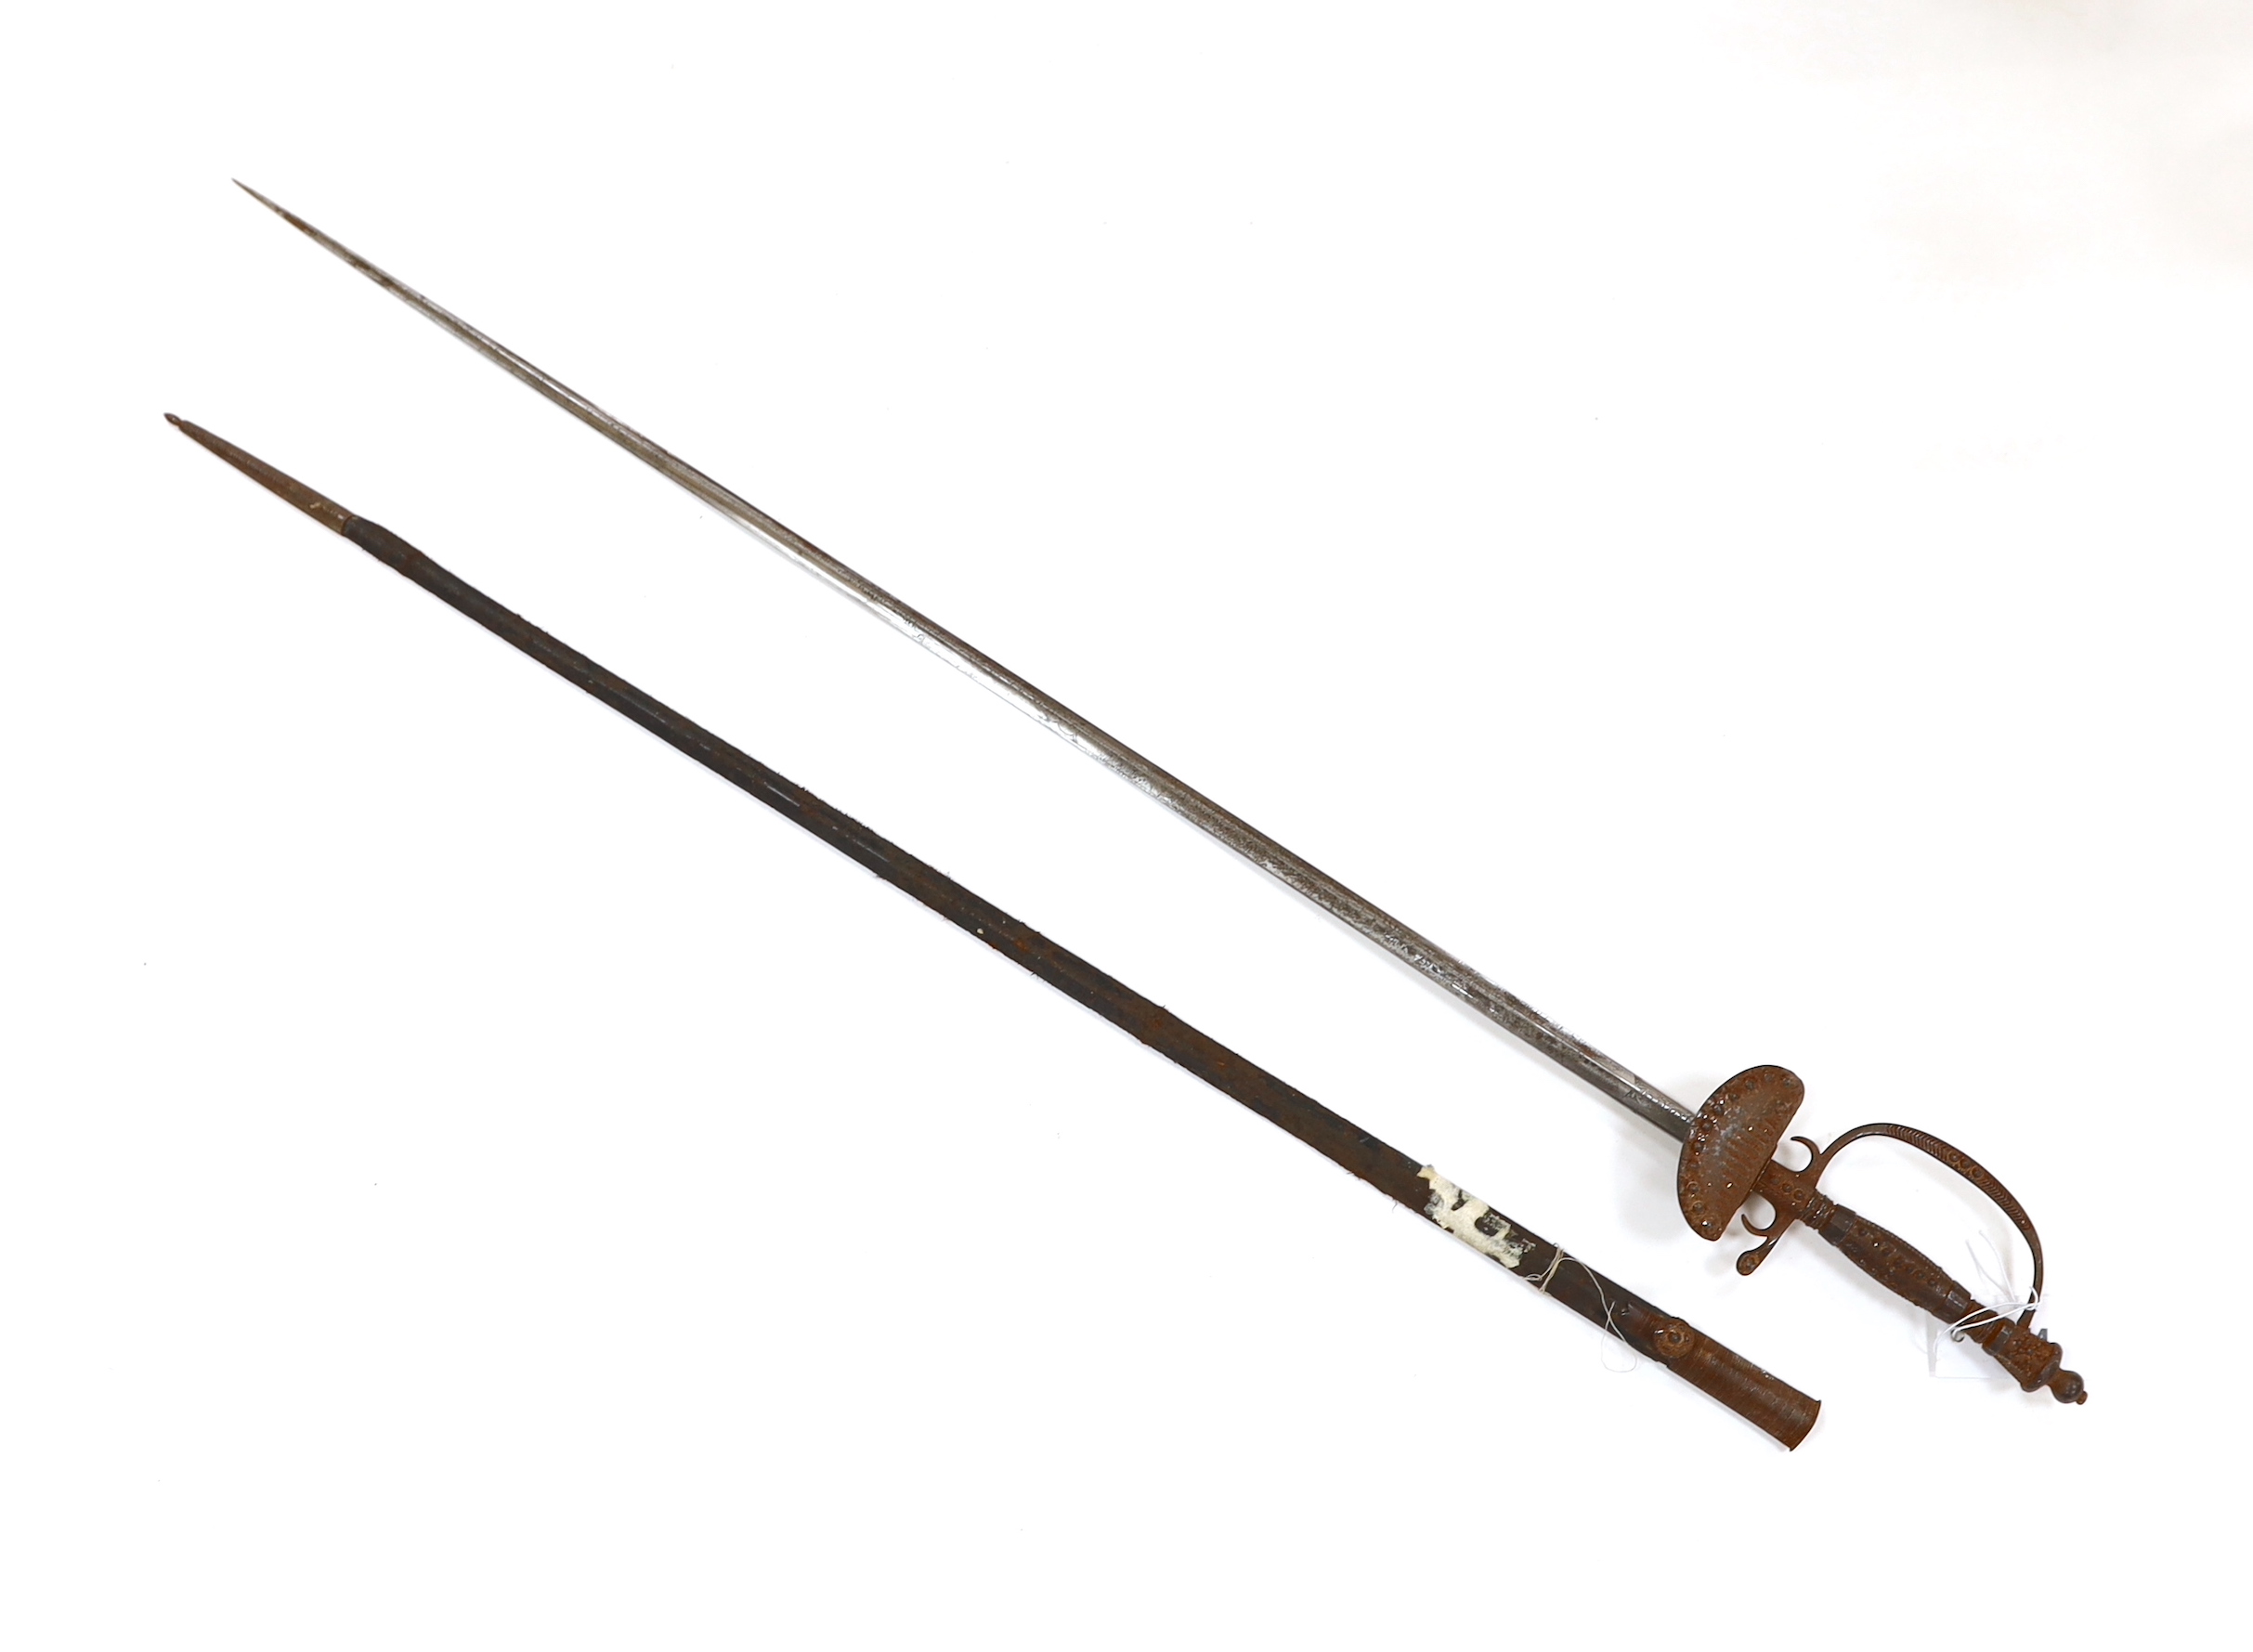 An English cut steel hilted dress court sword, c.1900, polished blade etched at forte, iron hilt slightly rusted, in its leather scabbard, blade 79cm